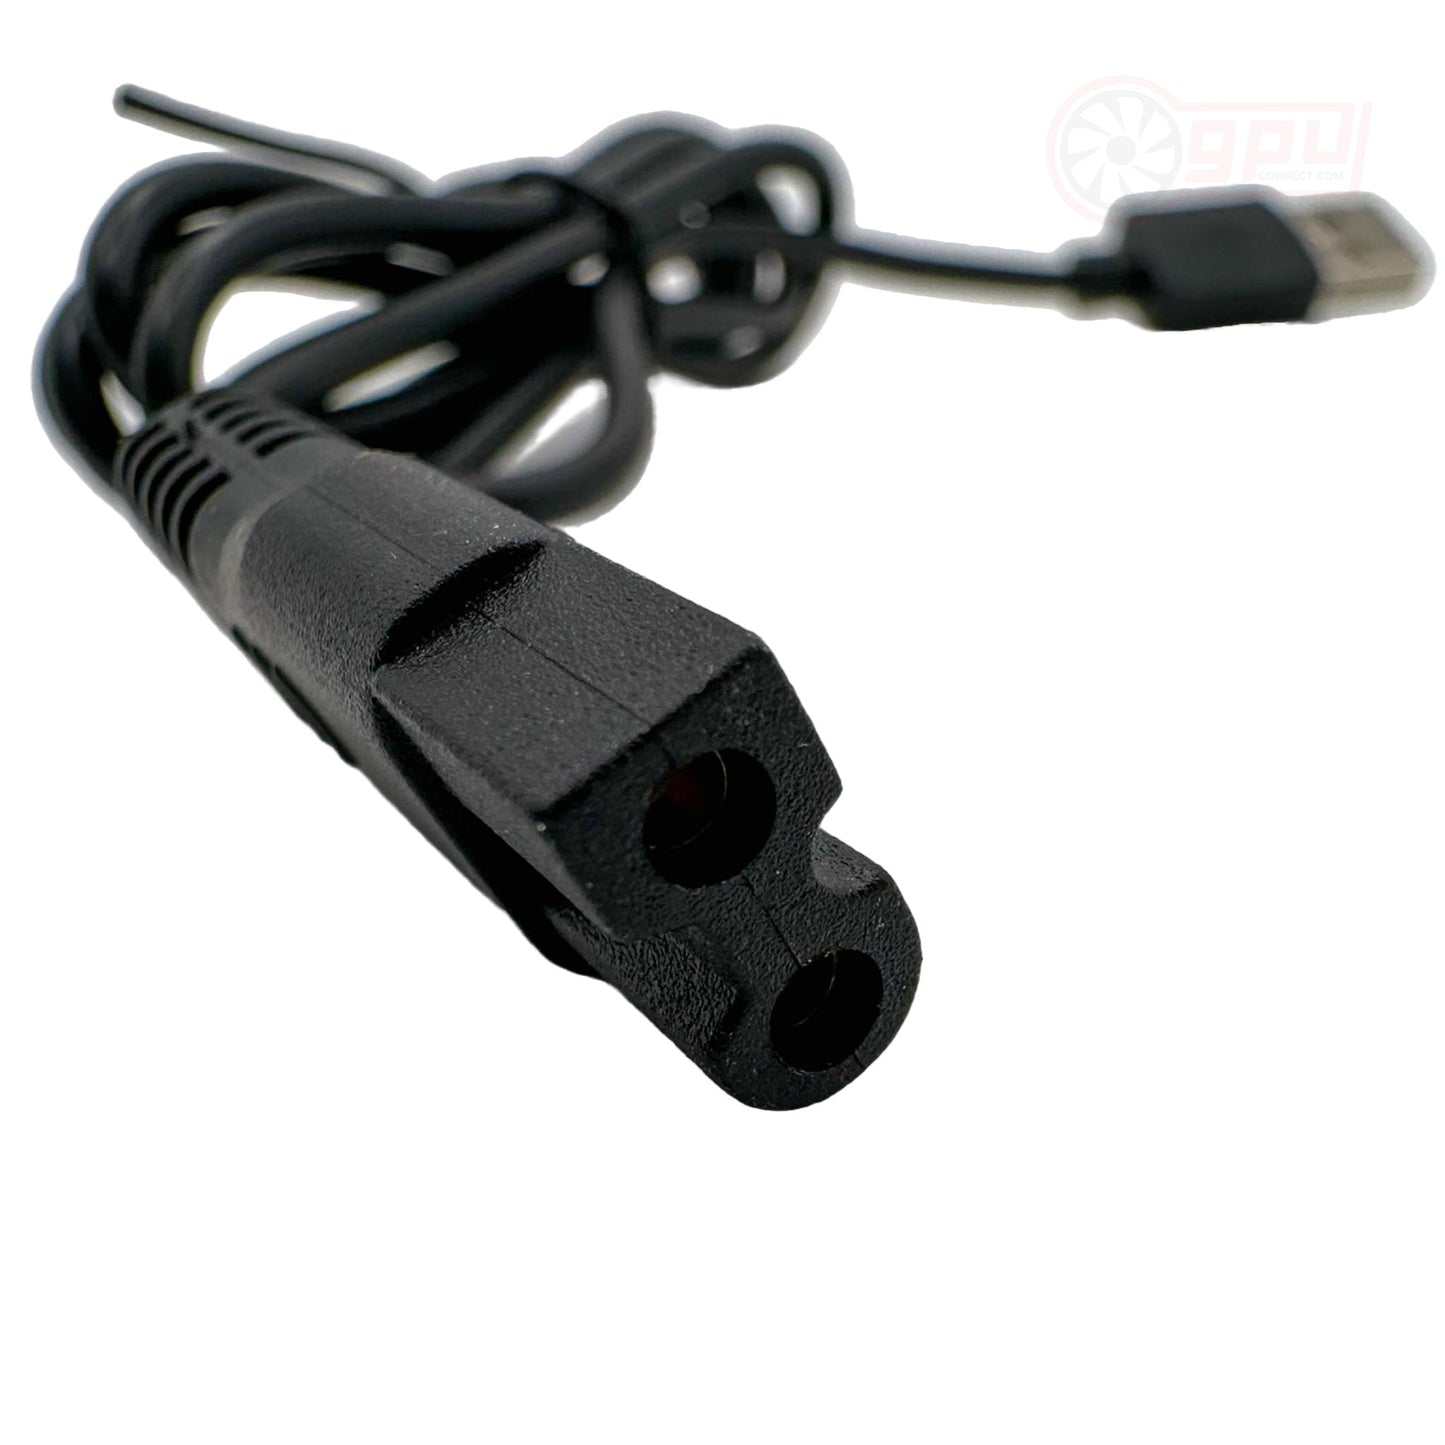 Brio Beardscape USB Charger Cable Replacement Trimmer Power Cord Adapter - GPUCONNECT.COM